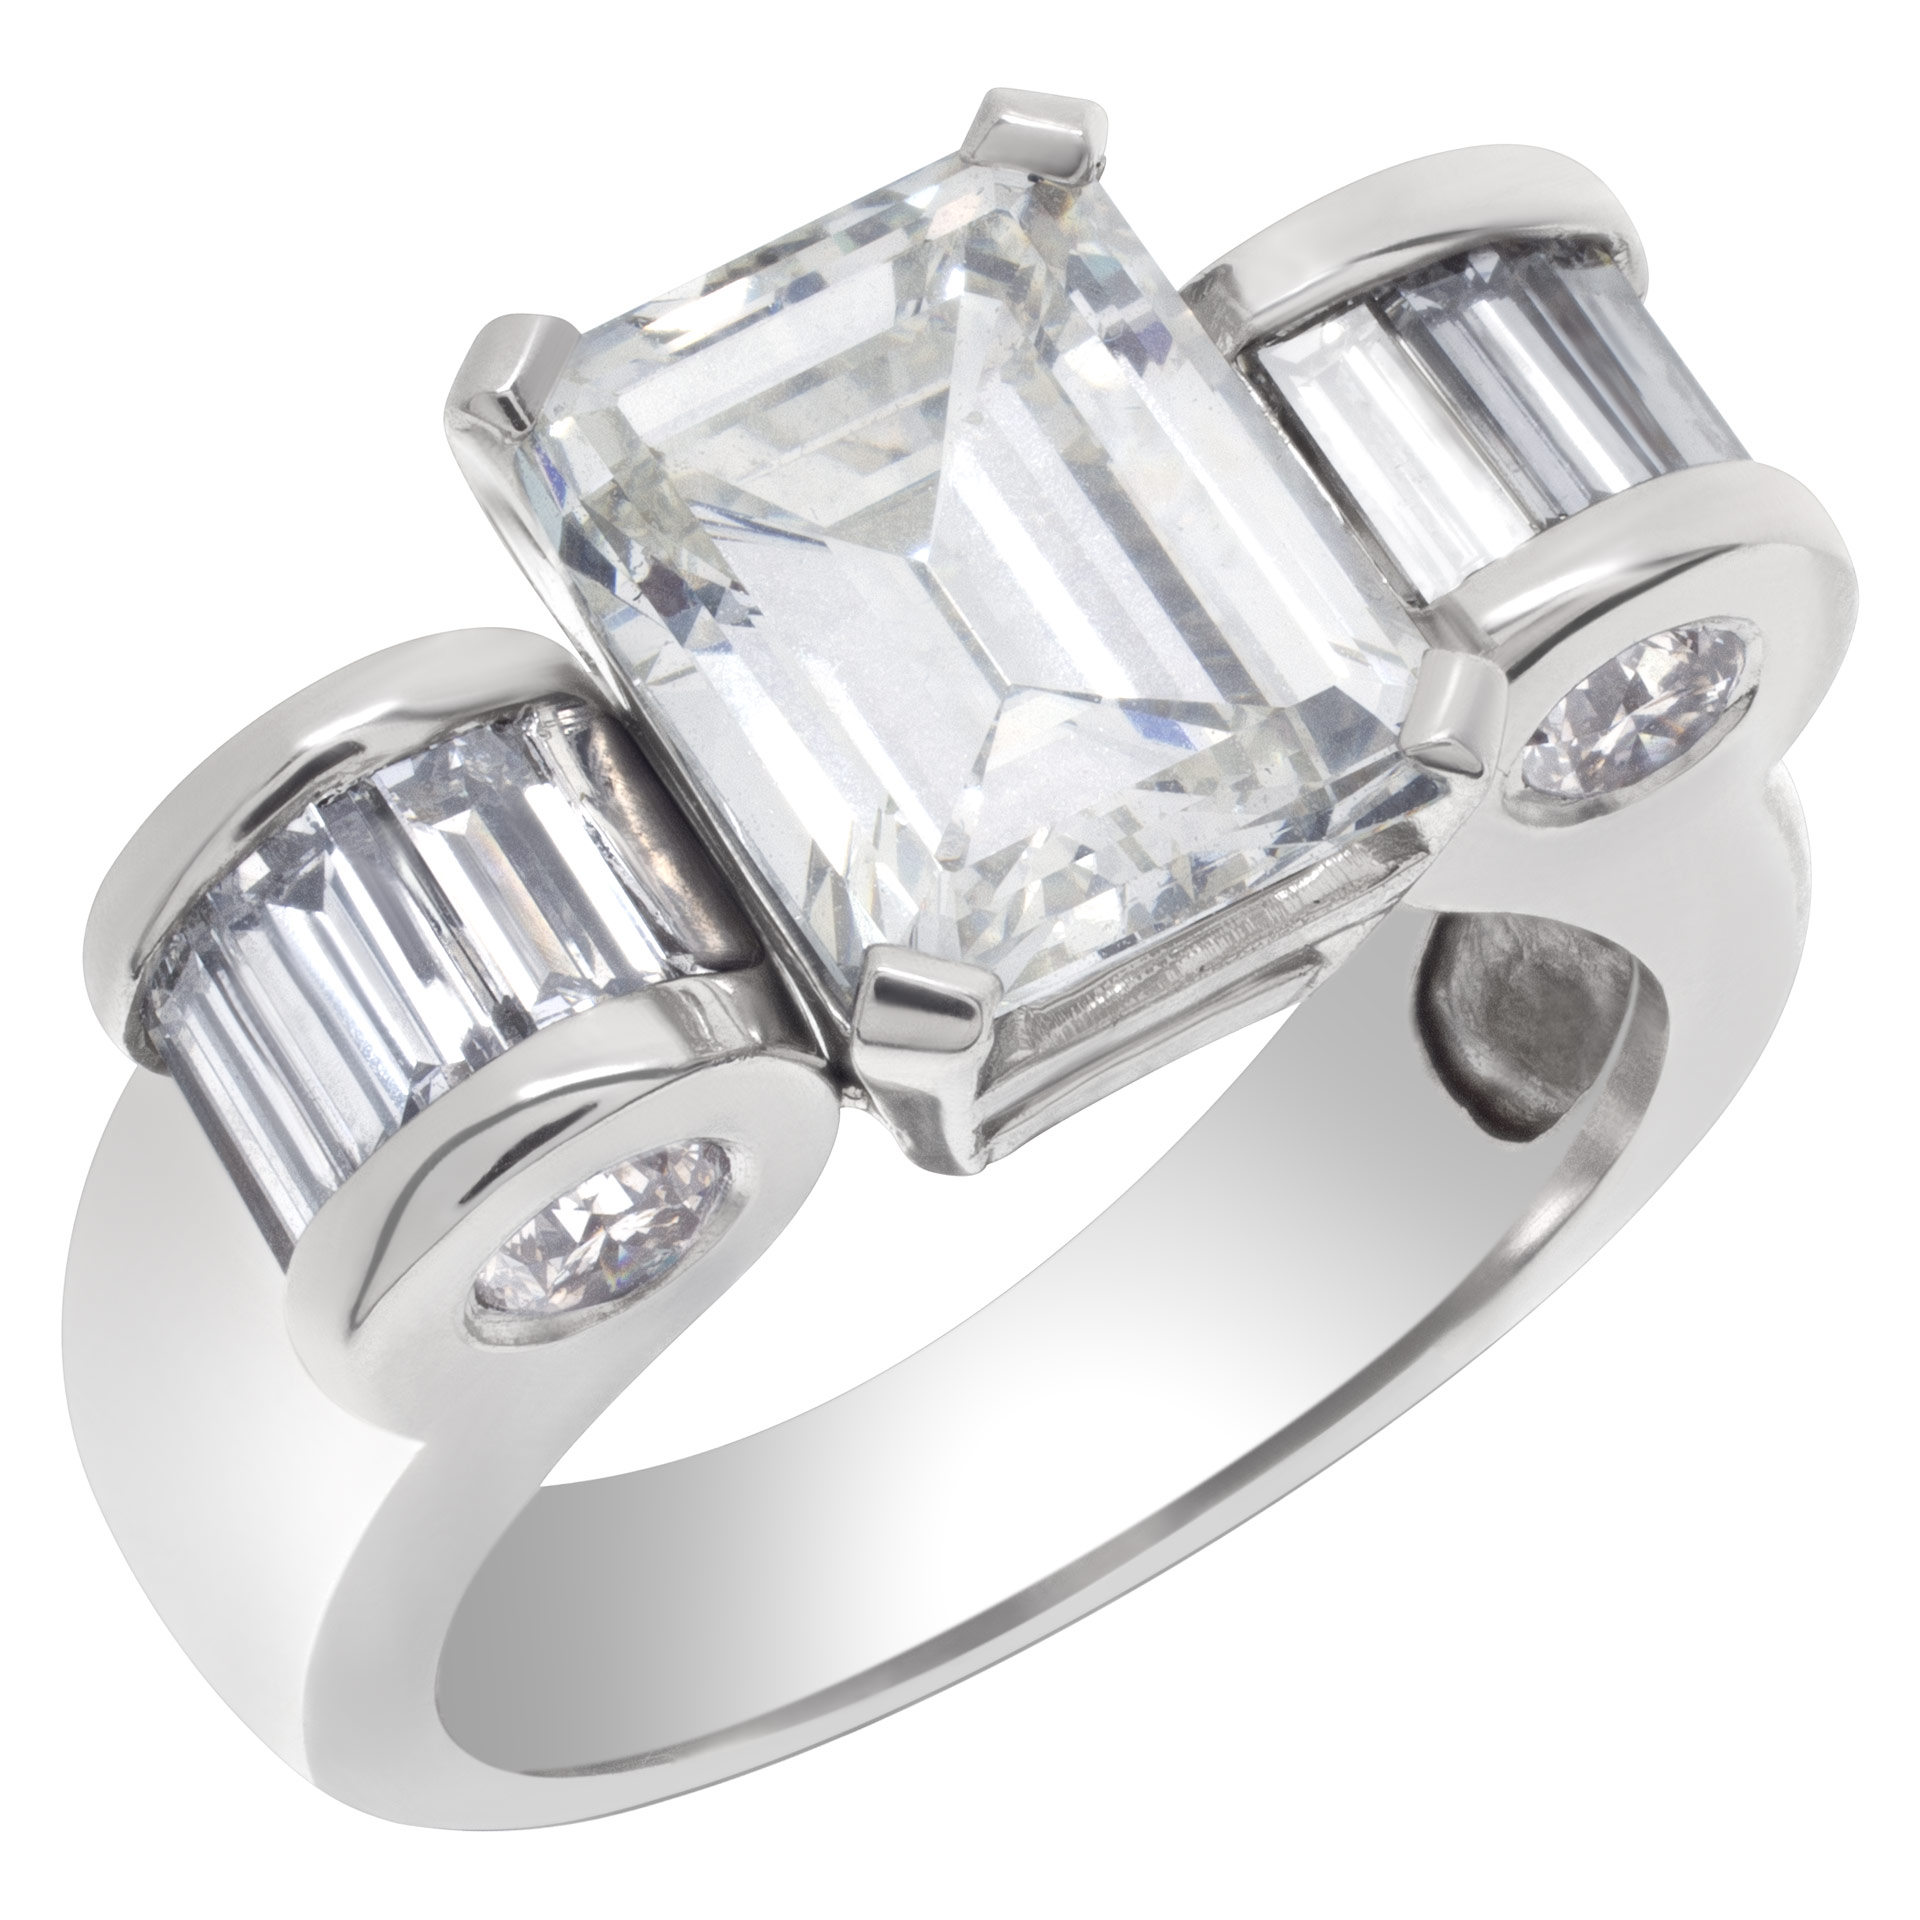 GIA certified Emerald cut 2.33 carat diamond (J color, VVS2 clarity) ring in platinum with 2 tapered image 2